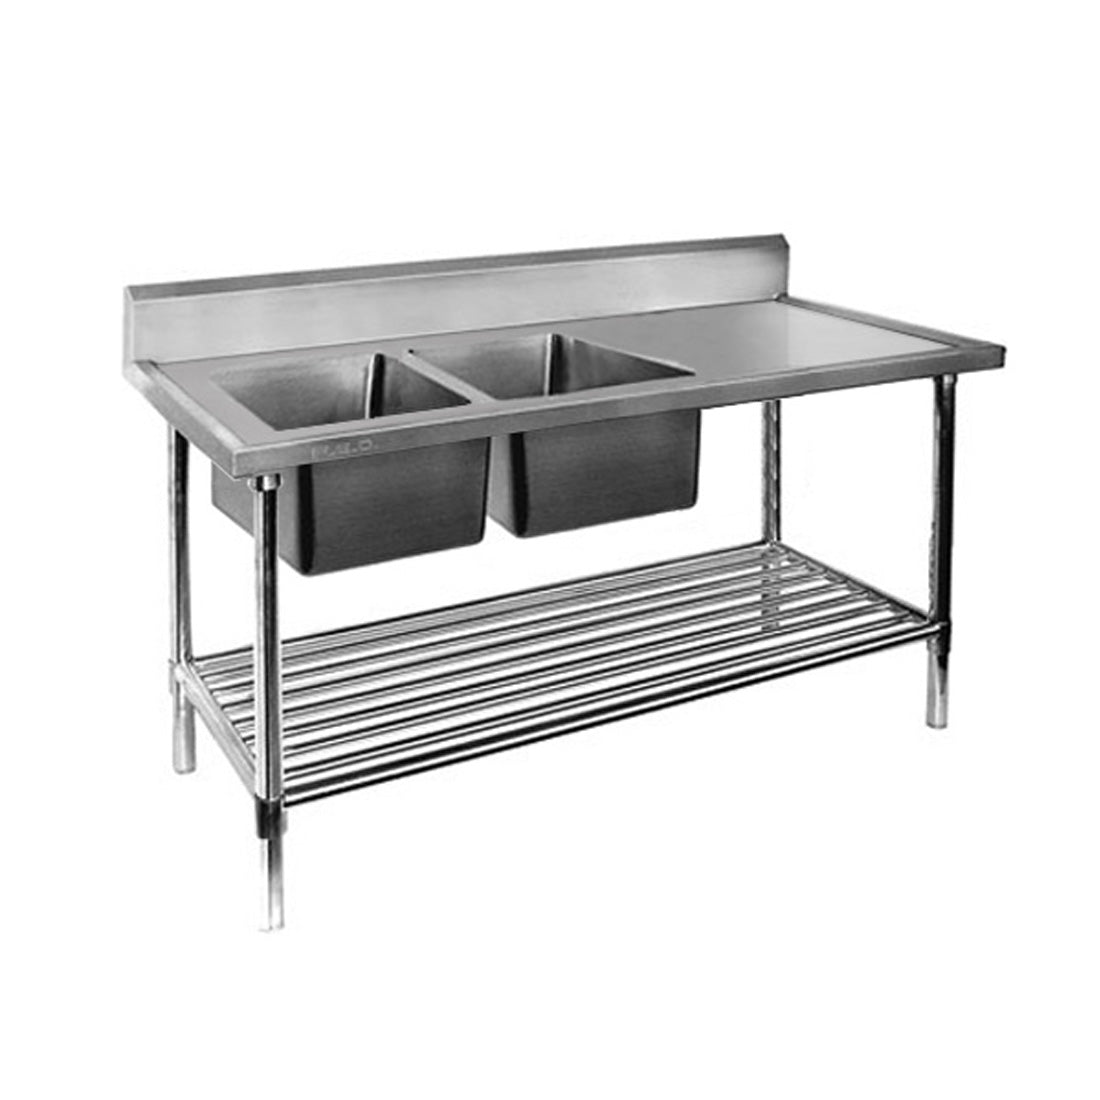 Modular Systems Double Left Sink Bench with Pot Undershelf 1800x700x900 DSB7-1800L/A